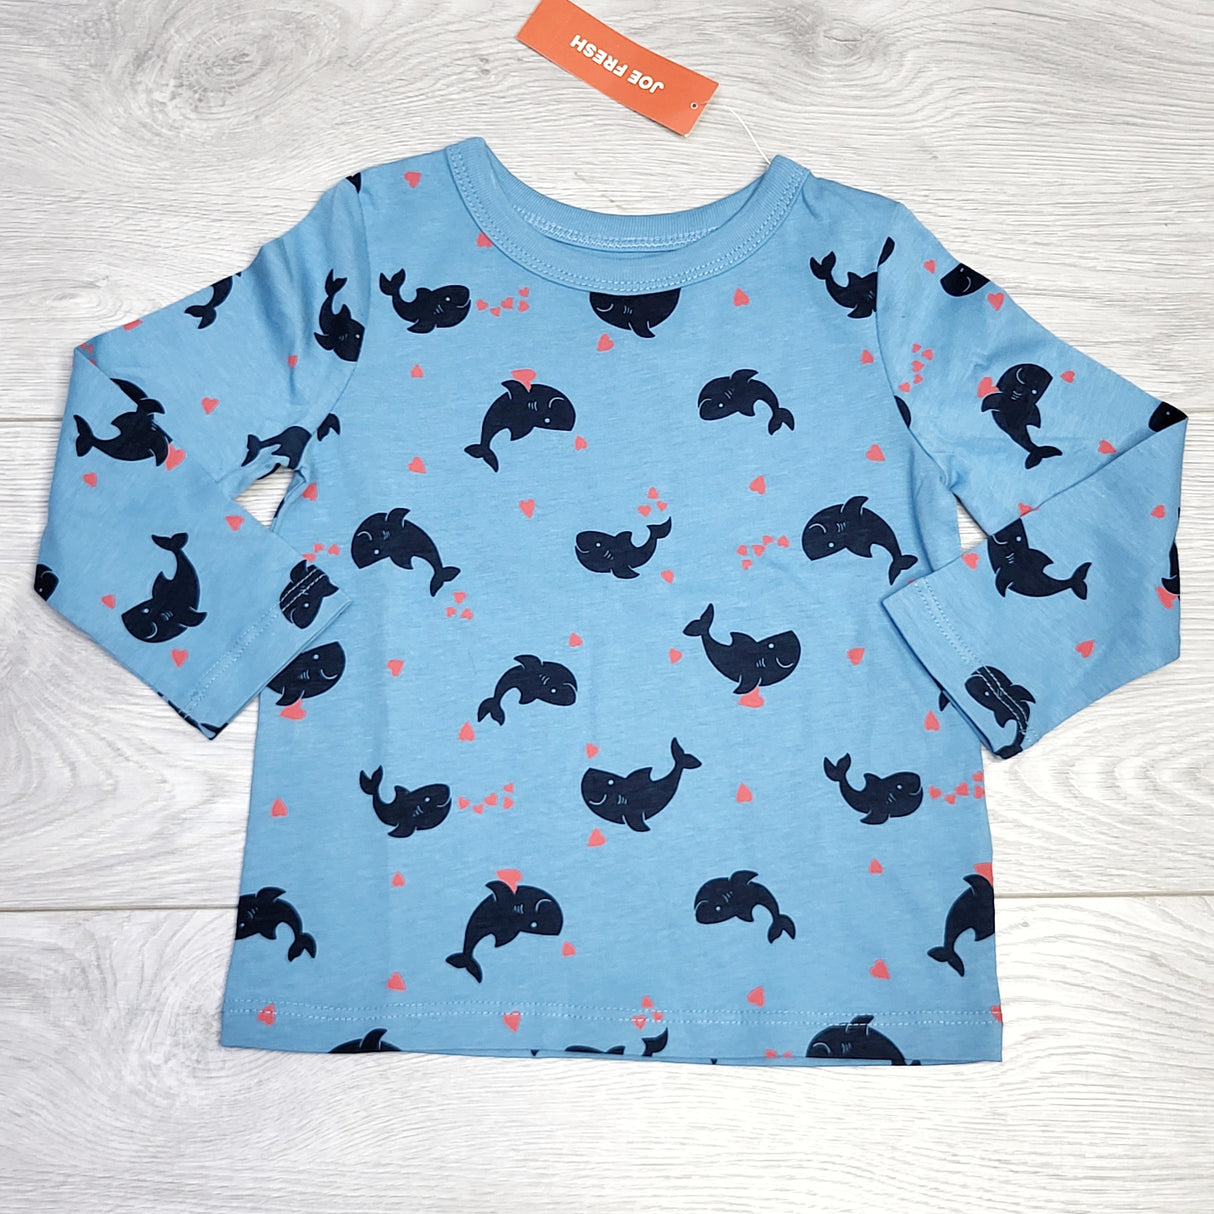 MSNDS1- NEW - Joe blue long sleeved top with whales. Size 12-18 months